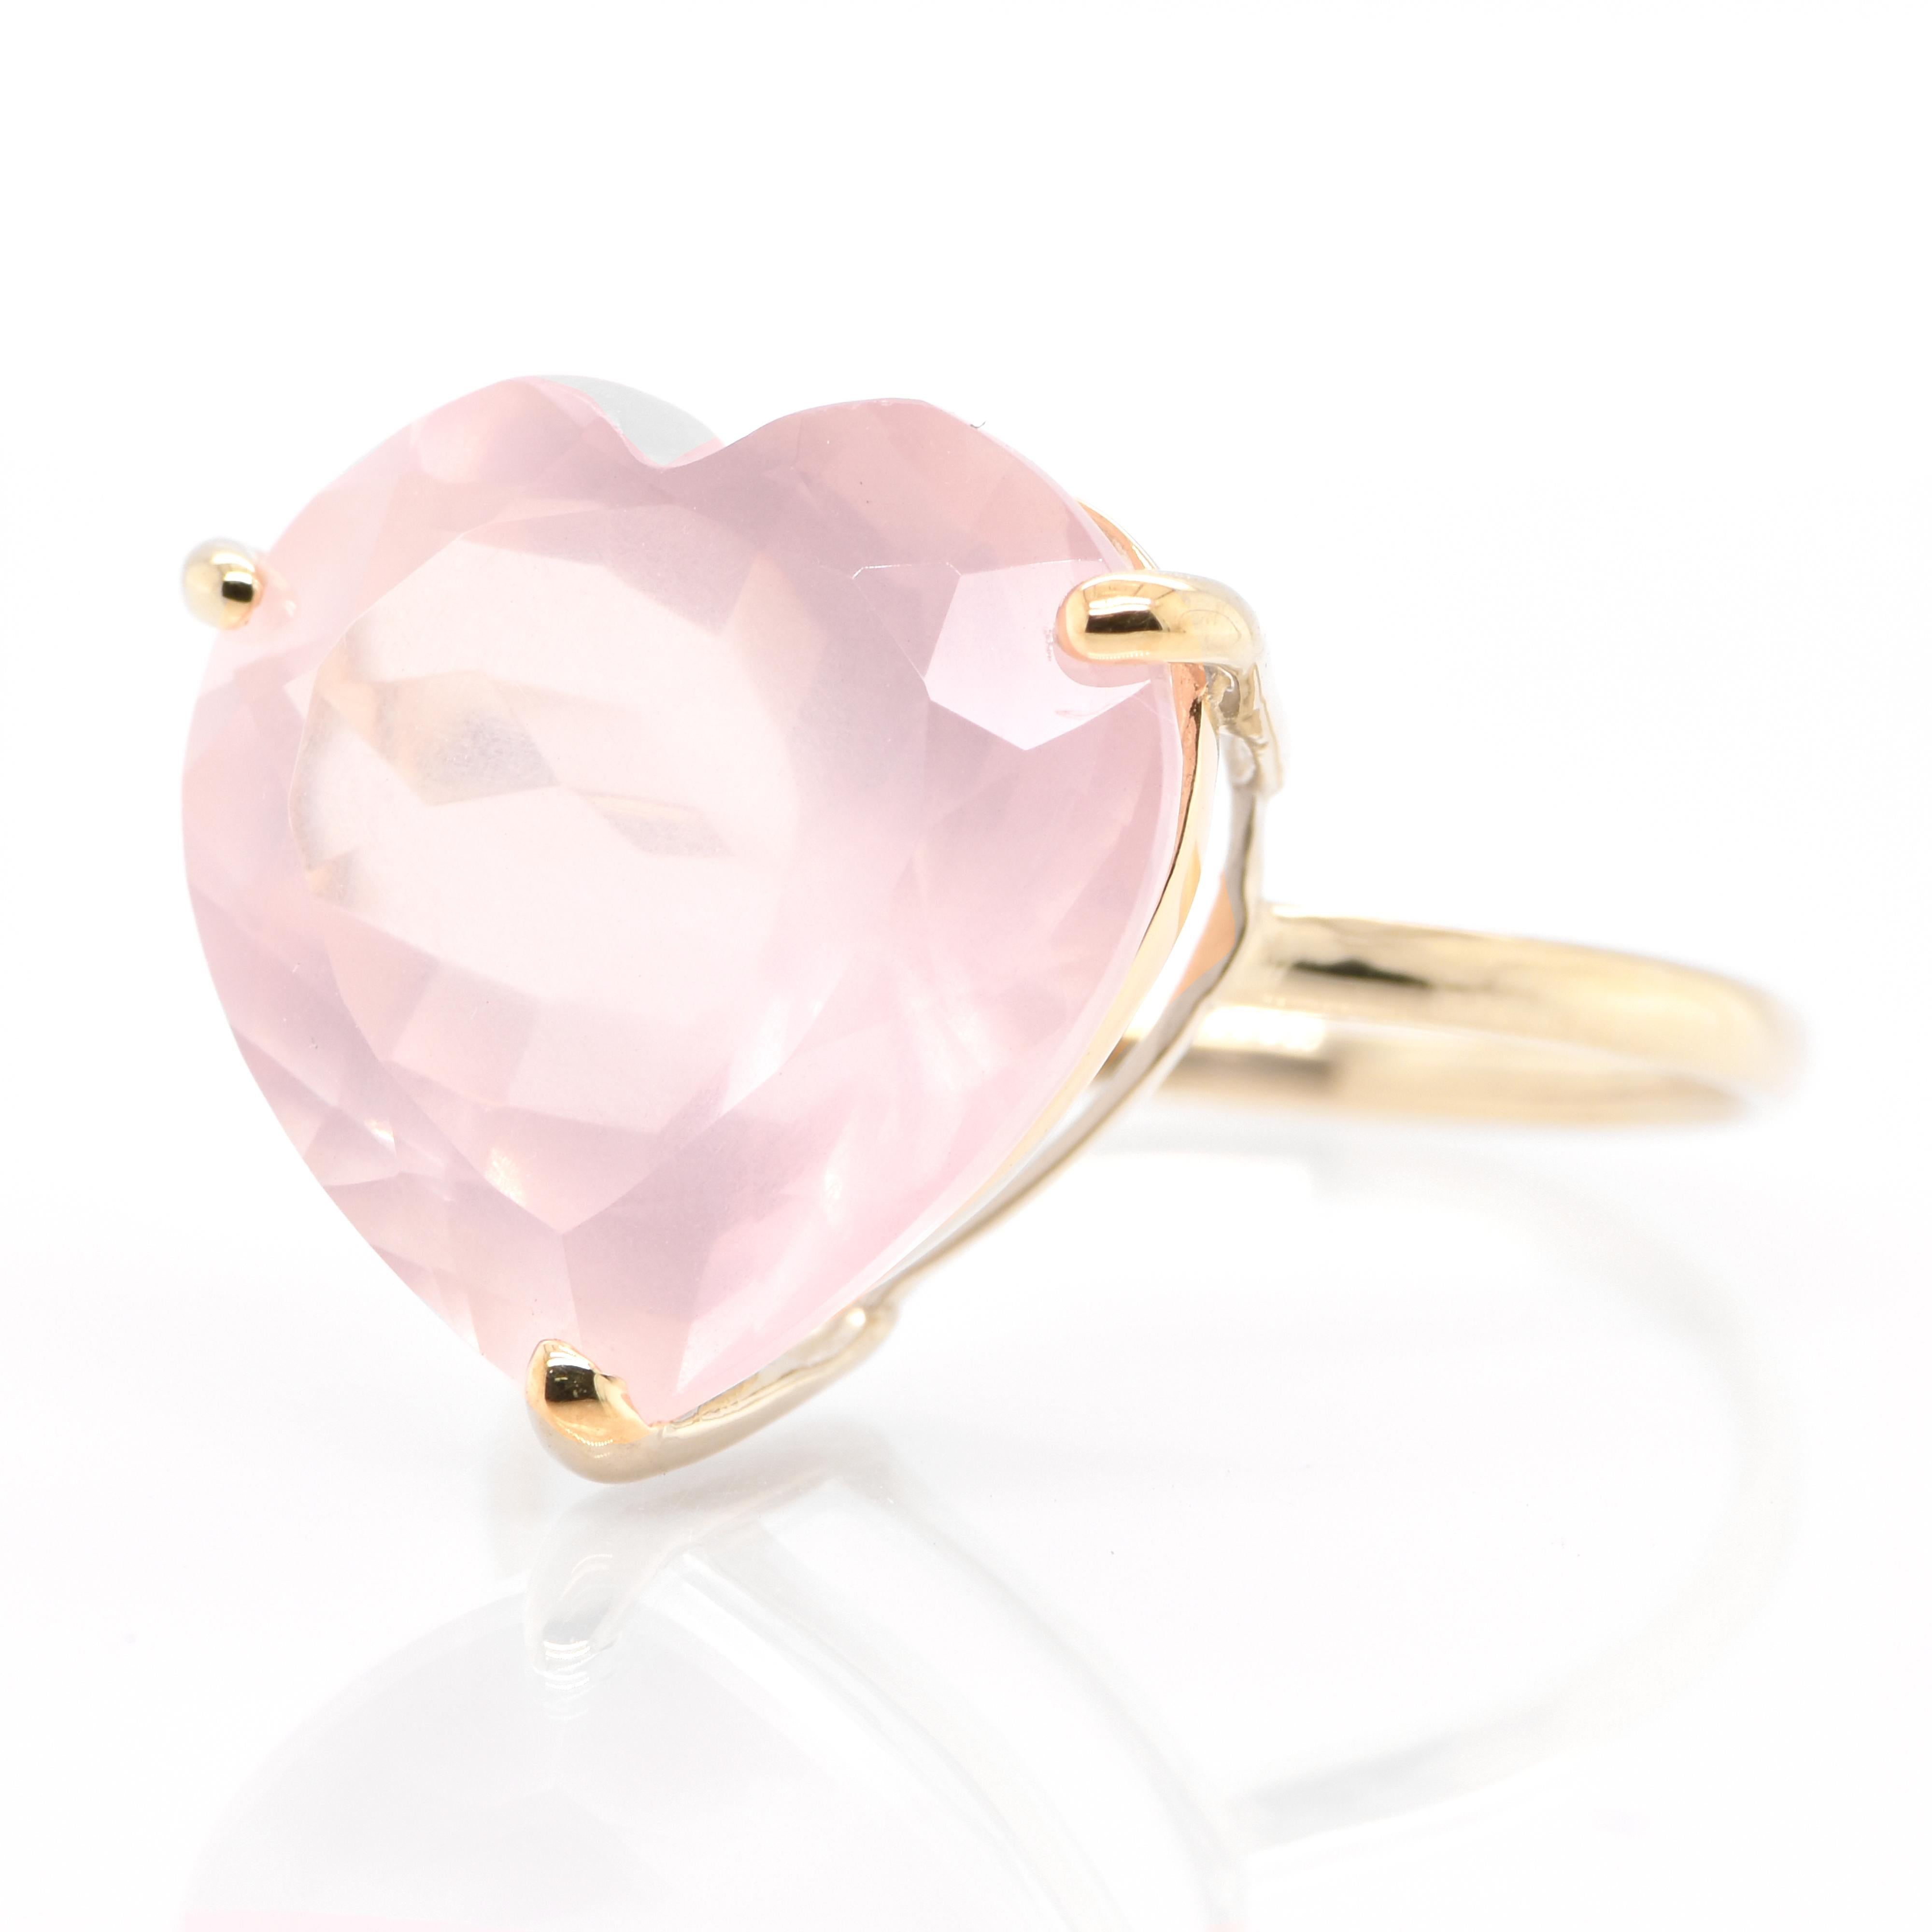 A beautiful Cocktail Ring featuring a 10.00 Carat, Natural Heart-Cut Rose Quartz set in 18 Karat Yellow Gold. Rose quartz gets its name from its delicate pastel pink color. Rose Quartz often features internal fractures that give it a cloudy